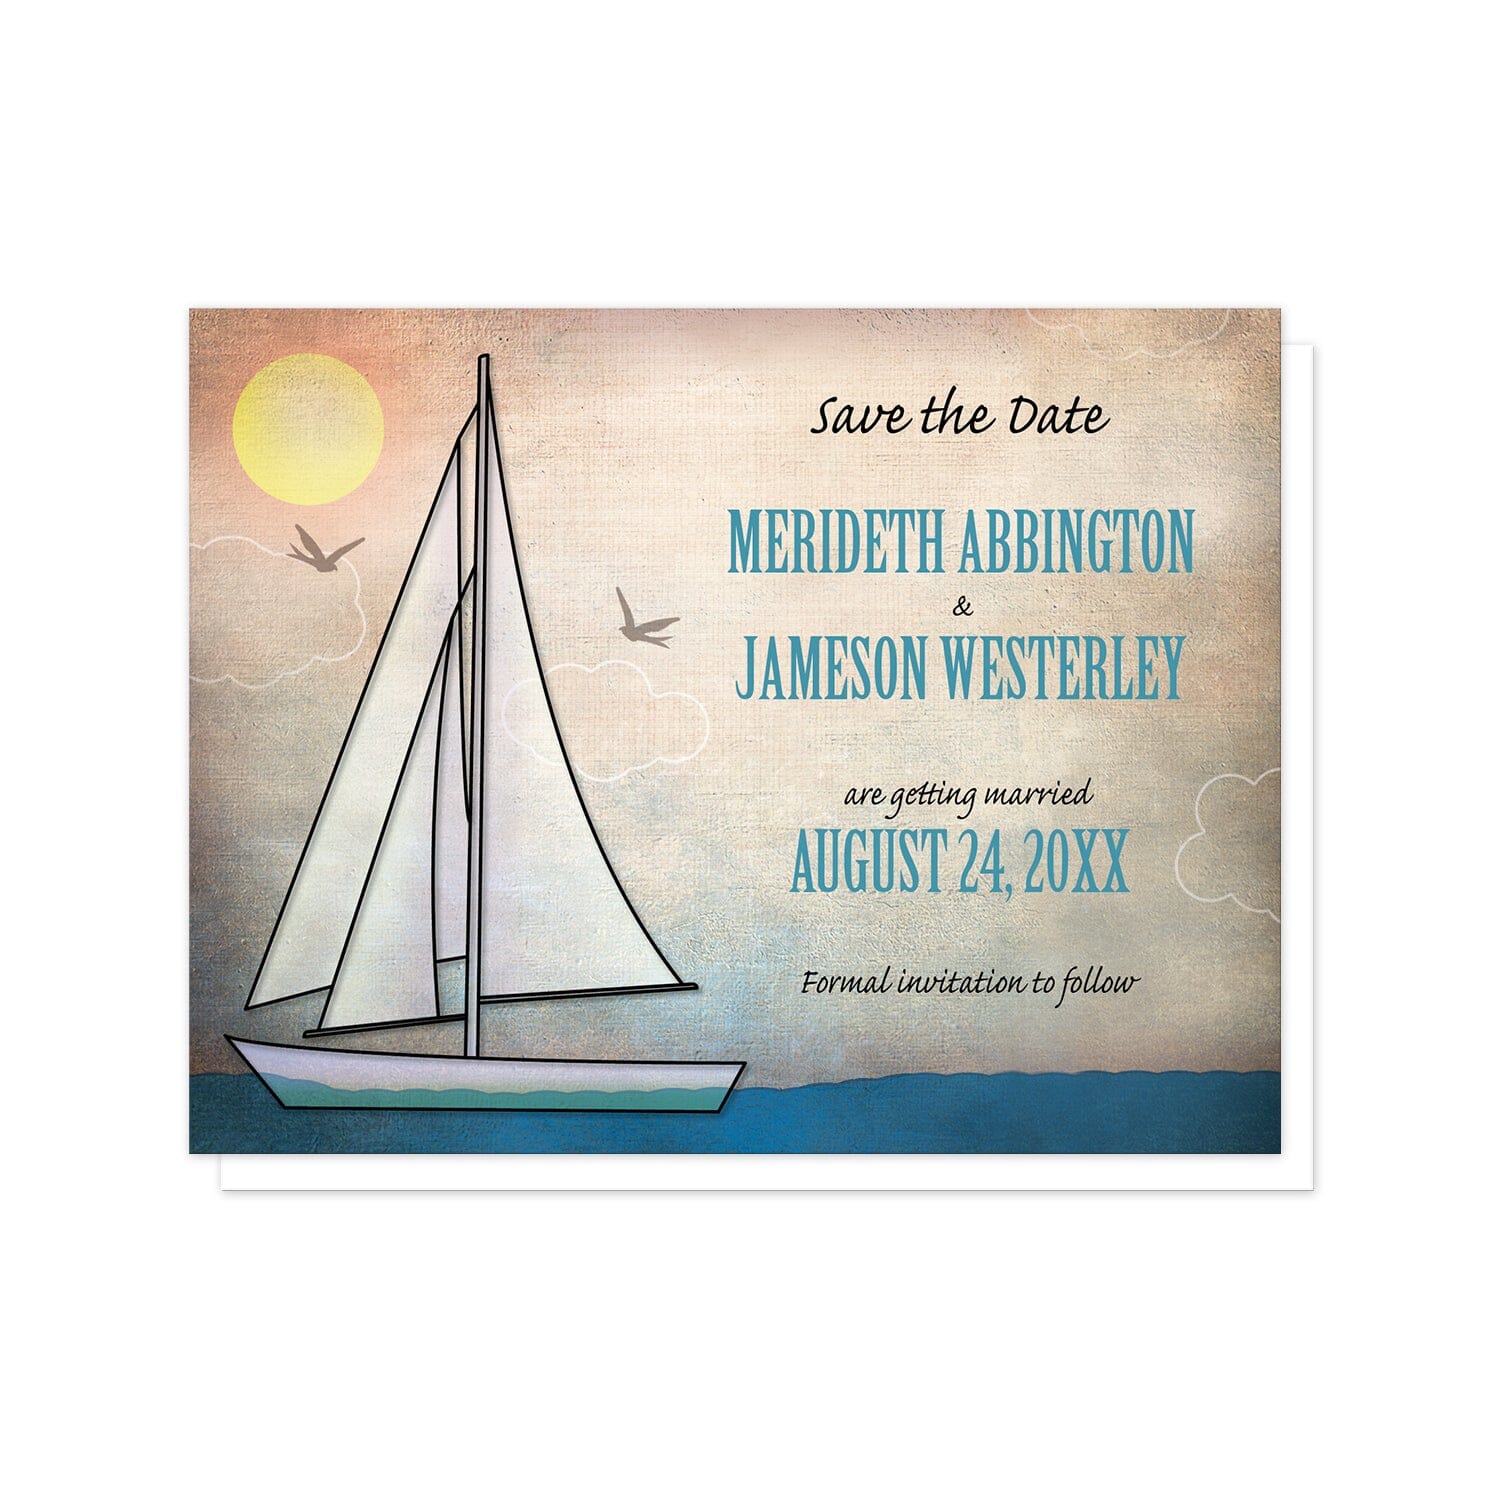 Rustic Sailboat Nautical Save the Date Cards at Artistically Invited. Rustic sailboat nautical save the date cards designed with an illustration of a sailboat on the water with the sun in the corner and two bird silhouettes around the boat. Your personalized wedding date details are custom printed in blue and black over the rustic canvas background design.